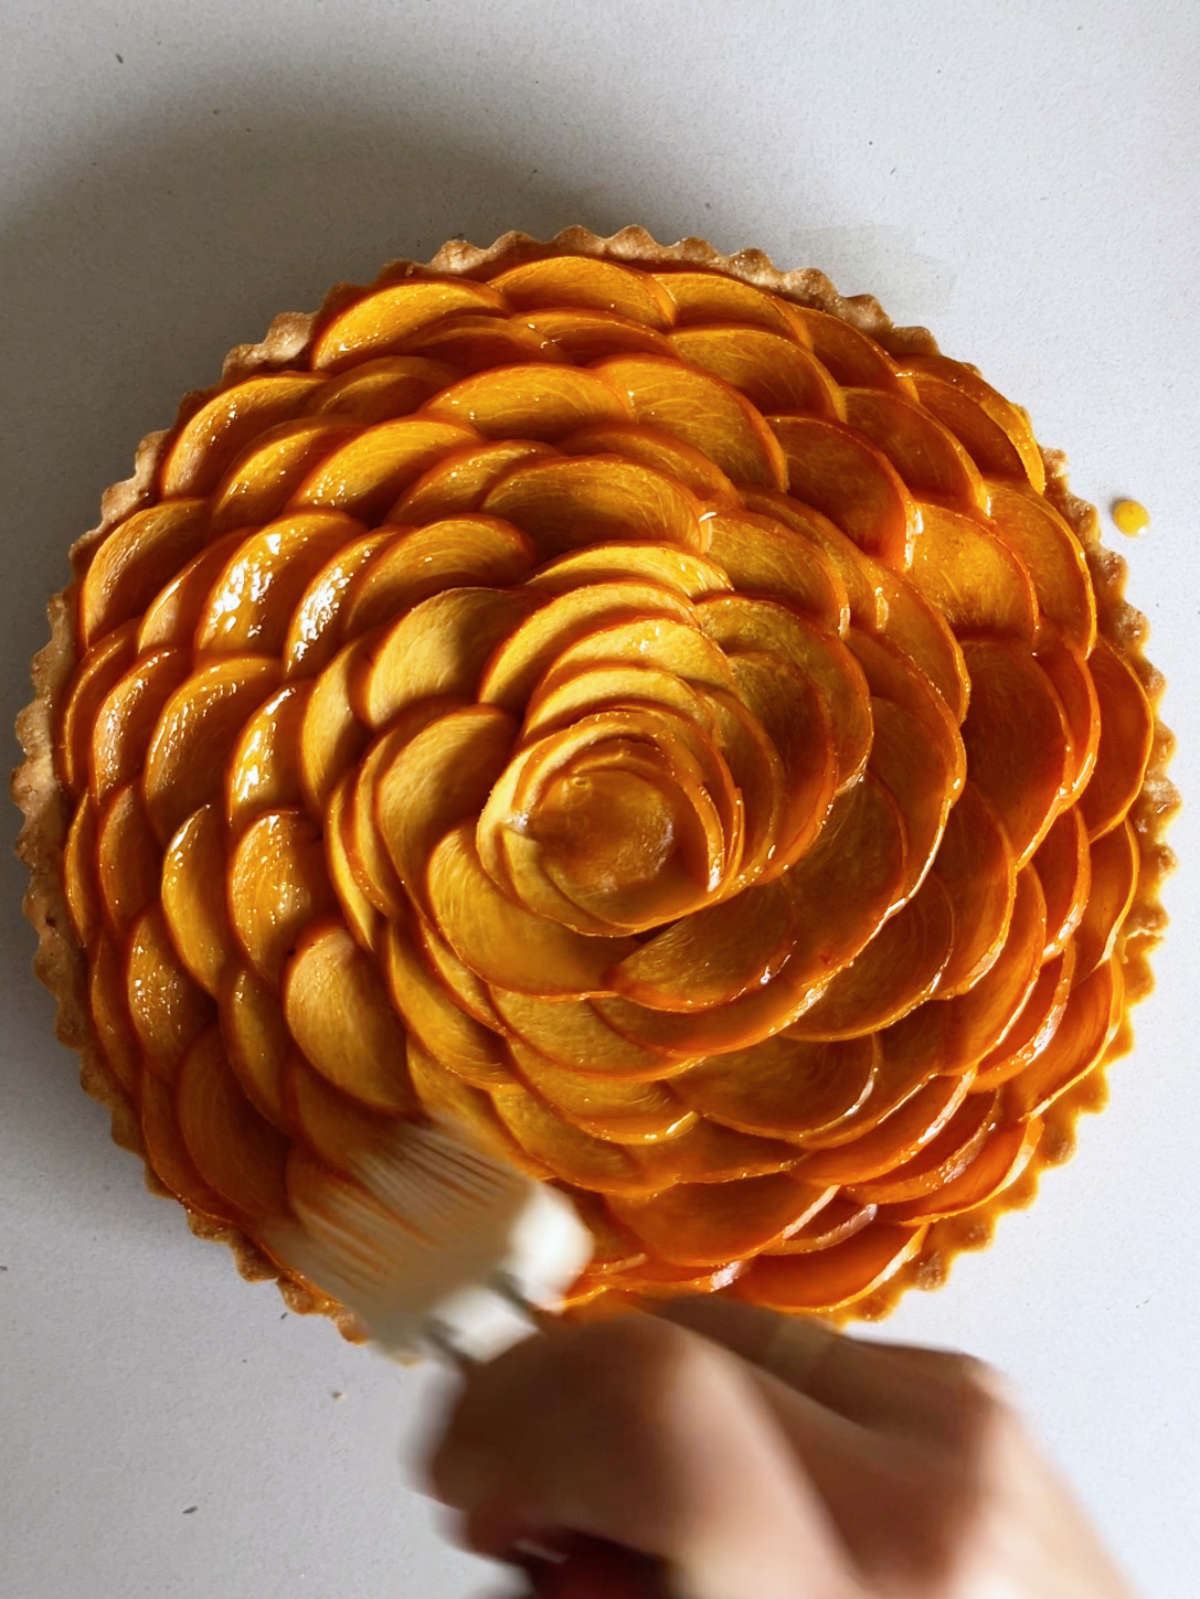 Brusing a tart with orange fruit arranged like a rose with a white pastry brush.